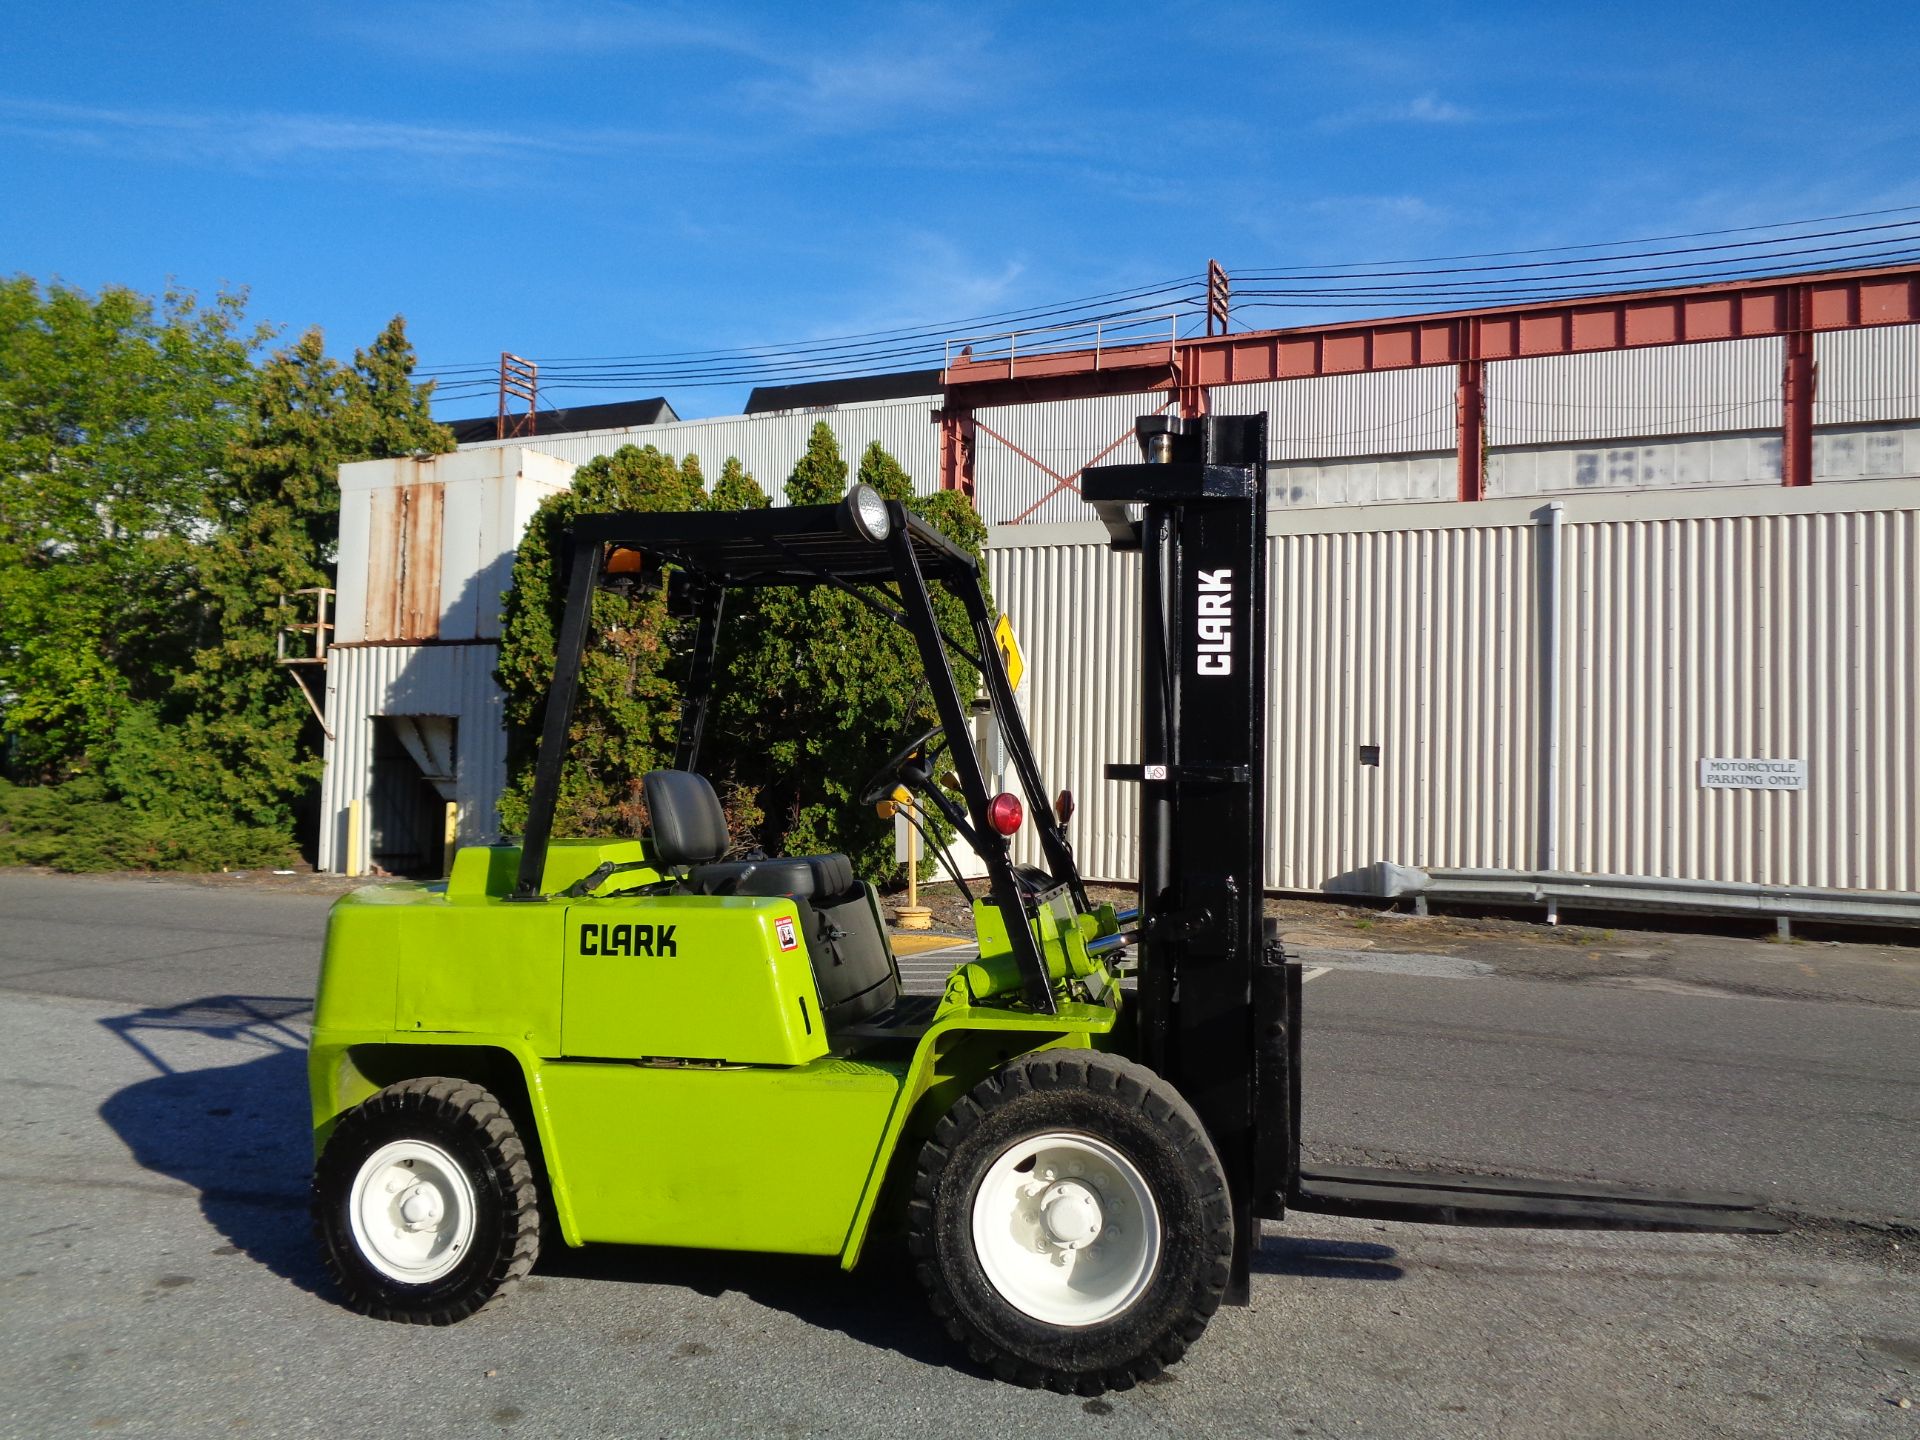 Clark C500-YS80 8,000 LBS Pneumatic Forklift - Image 7 of 11